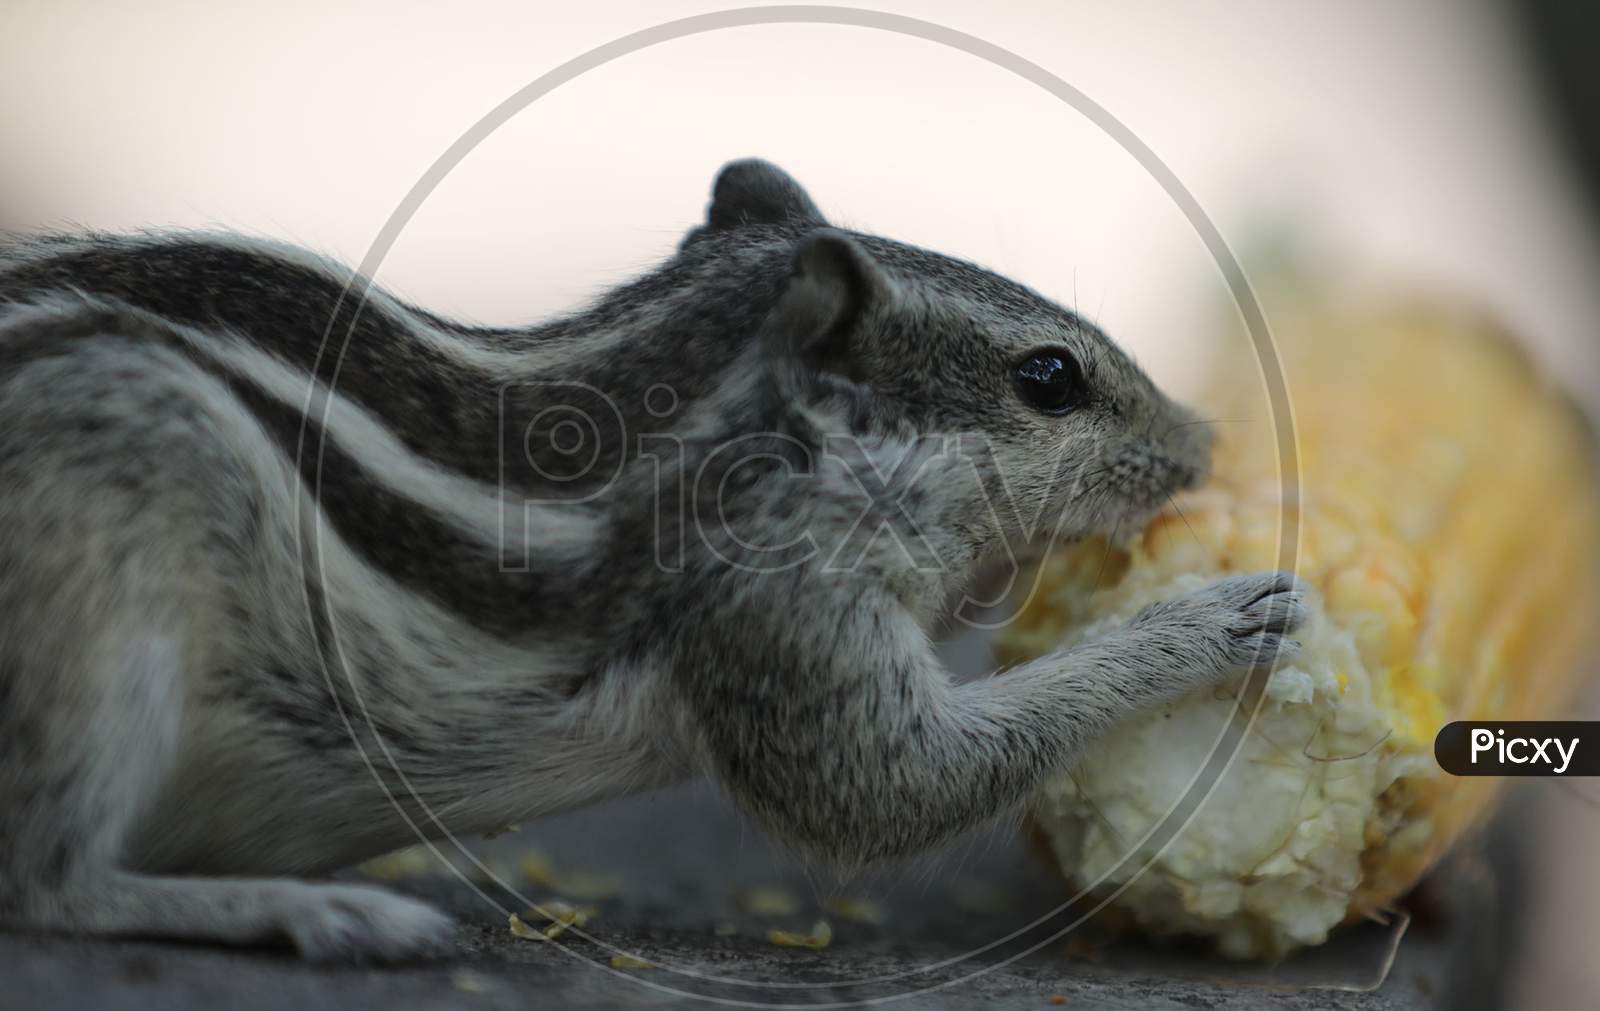 A squirrel eats corn at Jammu University ground on July 23, 2020 in Jammu.